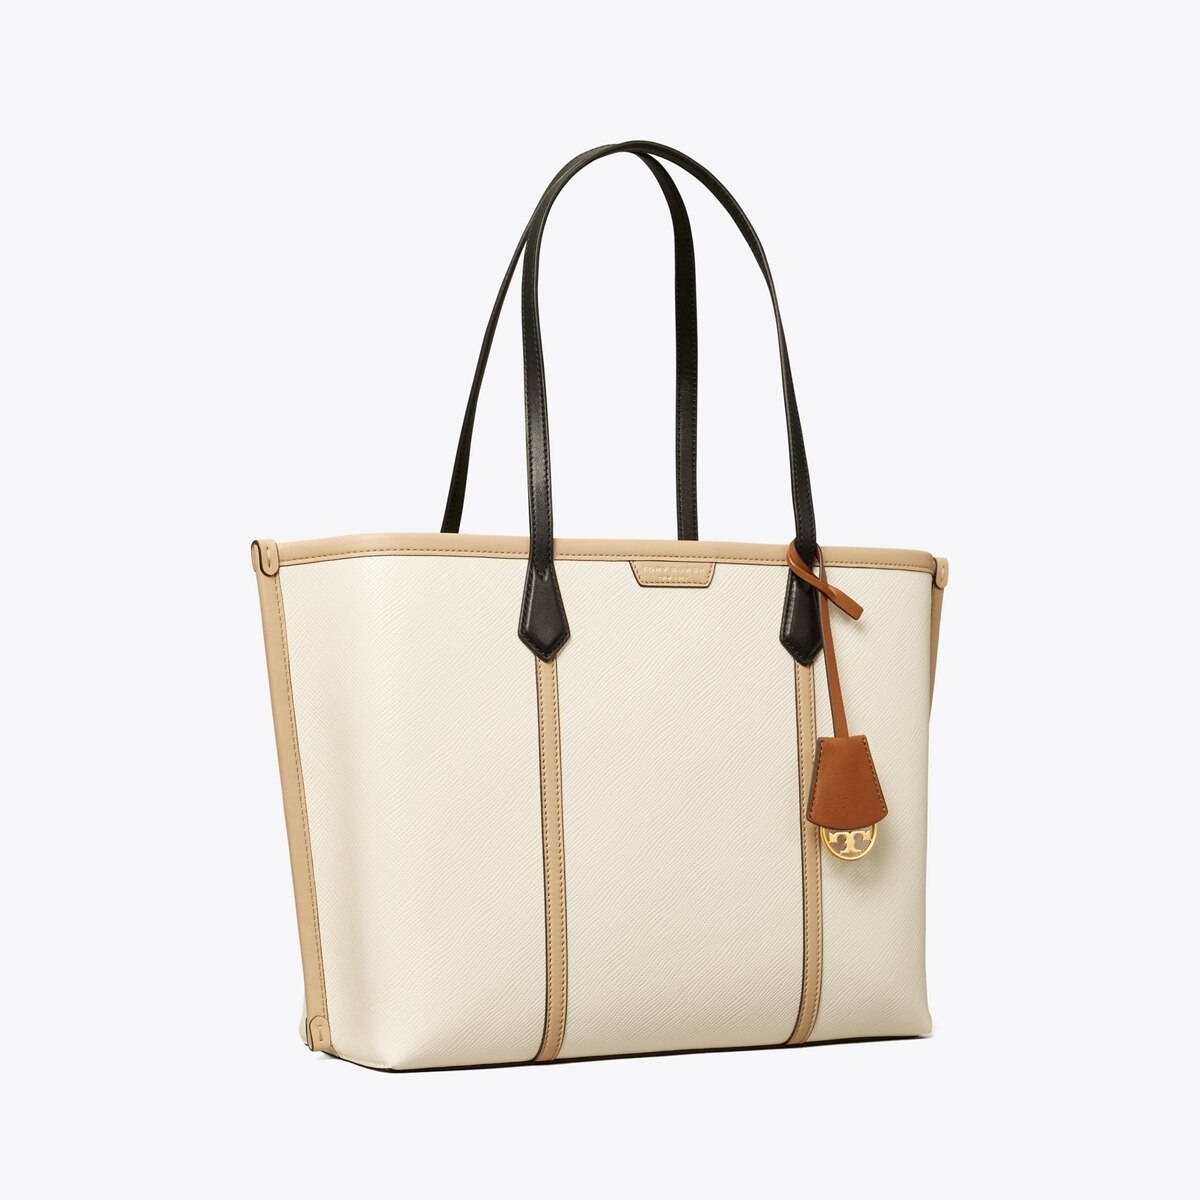 tory burch perry tote review